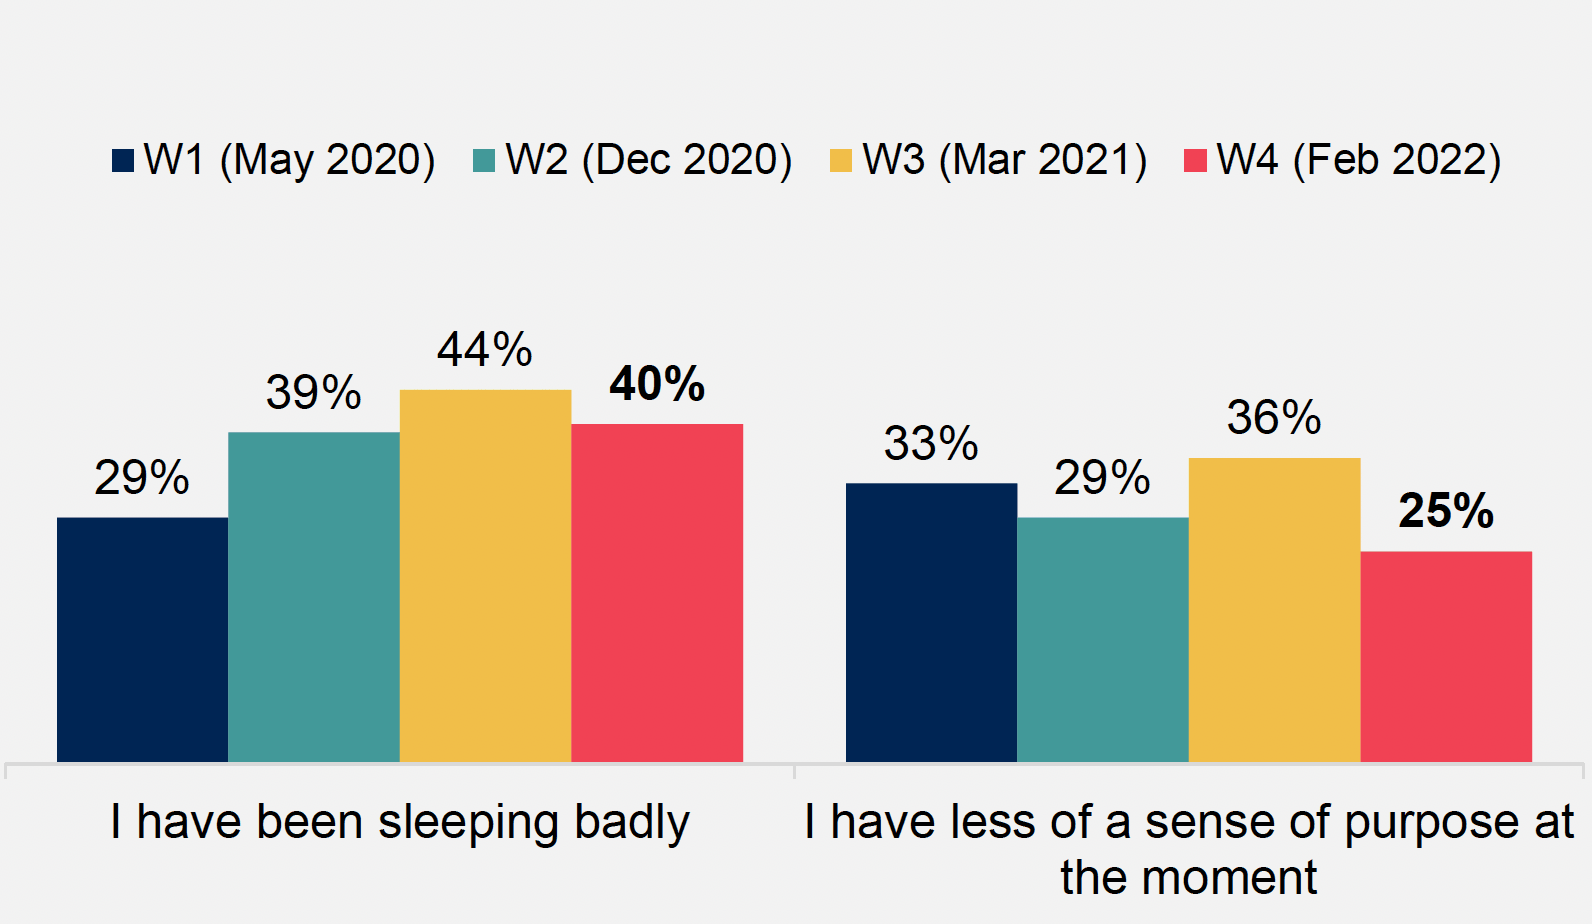 Bar chart showing that 40% are still sleeping badly (similar to waves 2 and 3), and that 25% say they have less of a sense of purpose (a fall from 36% at wave 3)